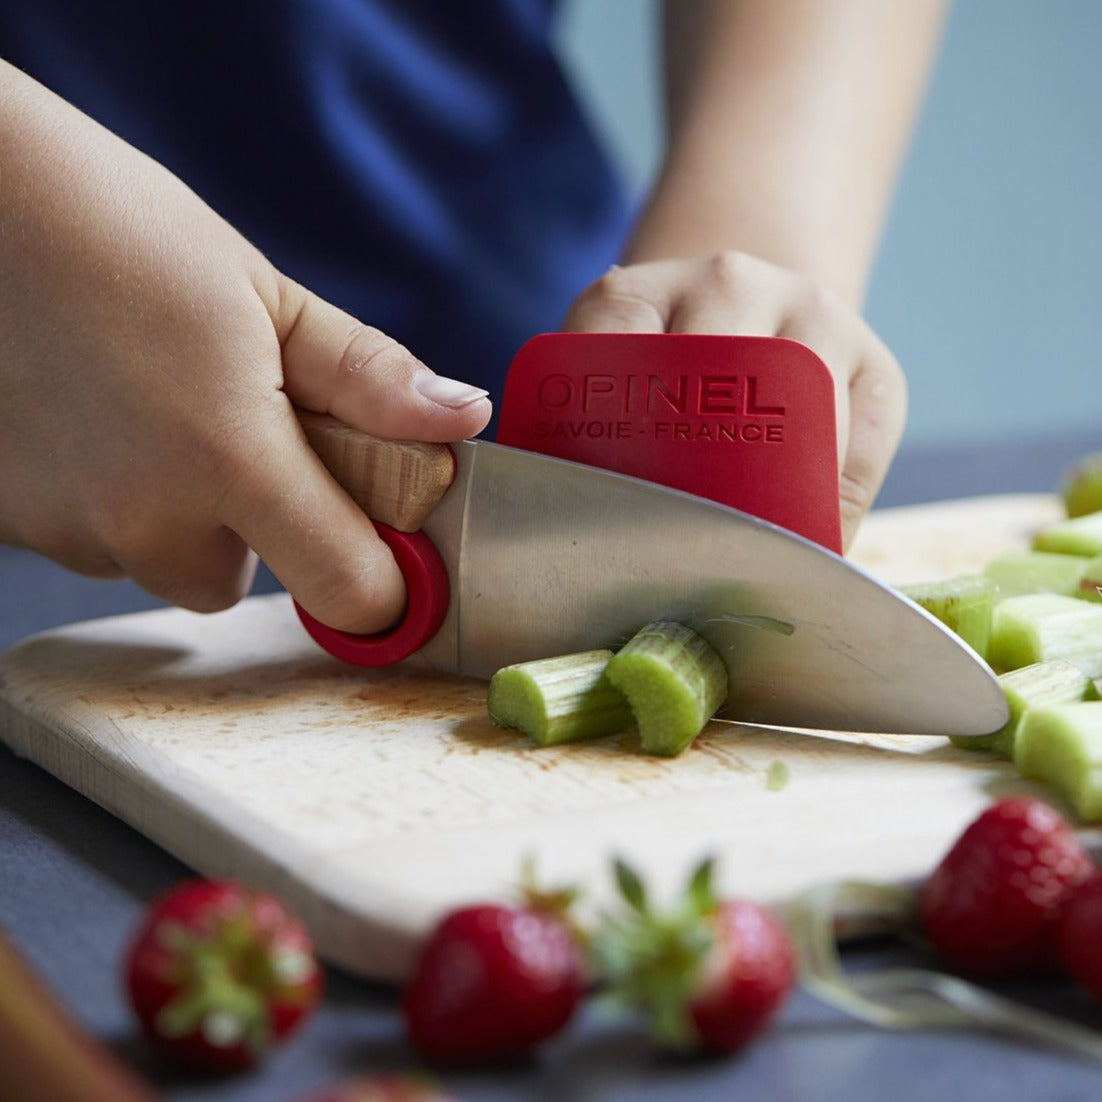 Kid-Friendly Kitchen Knives, Cookware & Gadgets to Get Kids Cooking